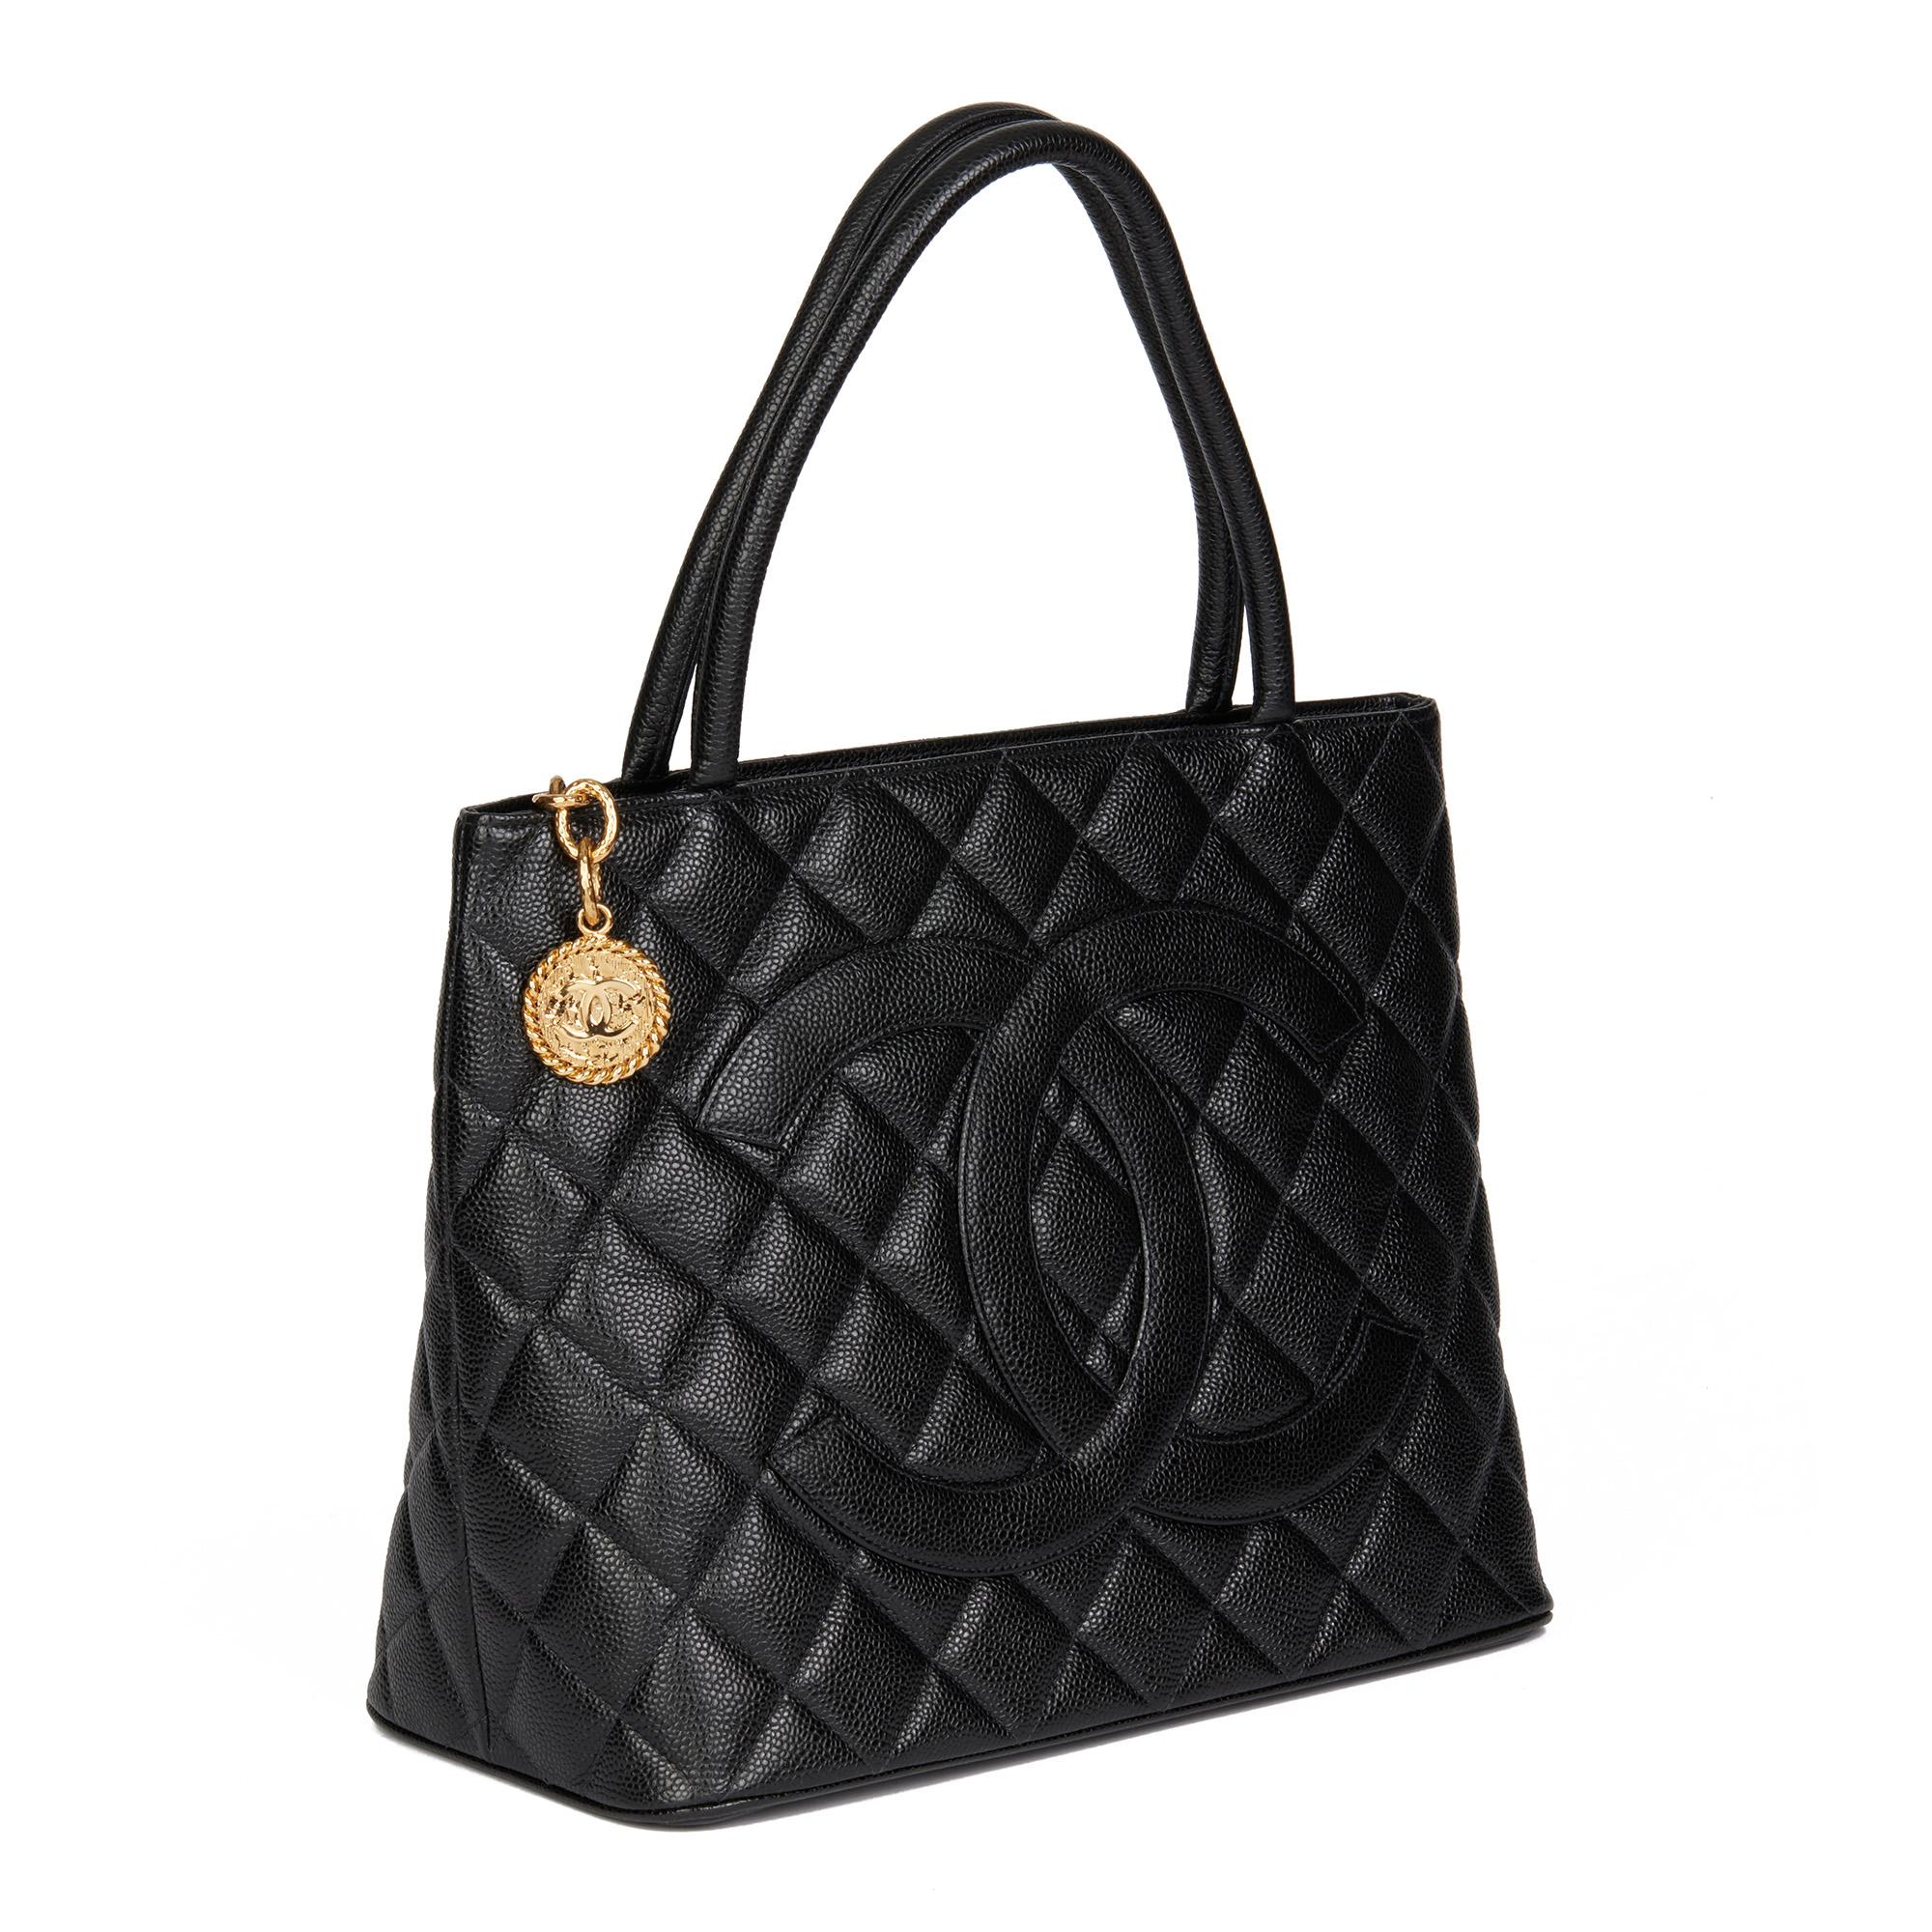 CHANEL
Black Quilted Caviar Leather Medallion Tote

Xupes Reference: HB4652
Serial Number: 7698952
Age (Circa): 2001
Accompanied By: Authenticity Card
Authenticity Details: Authenticity Card, Serial Sticker (Made in France)
Gender: Ladies
Type: